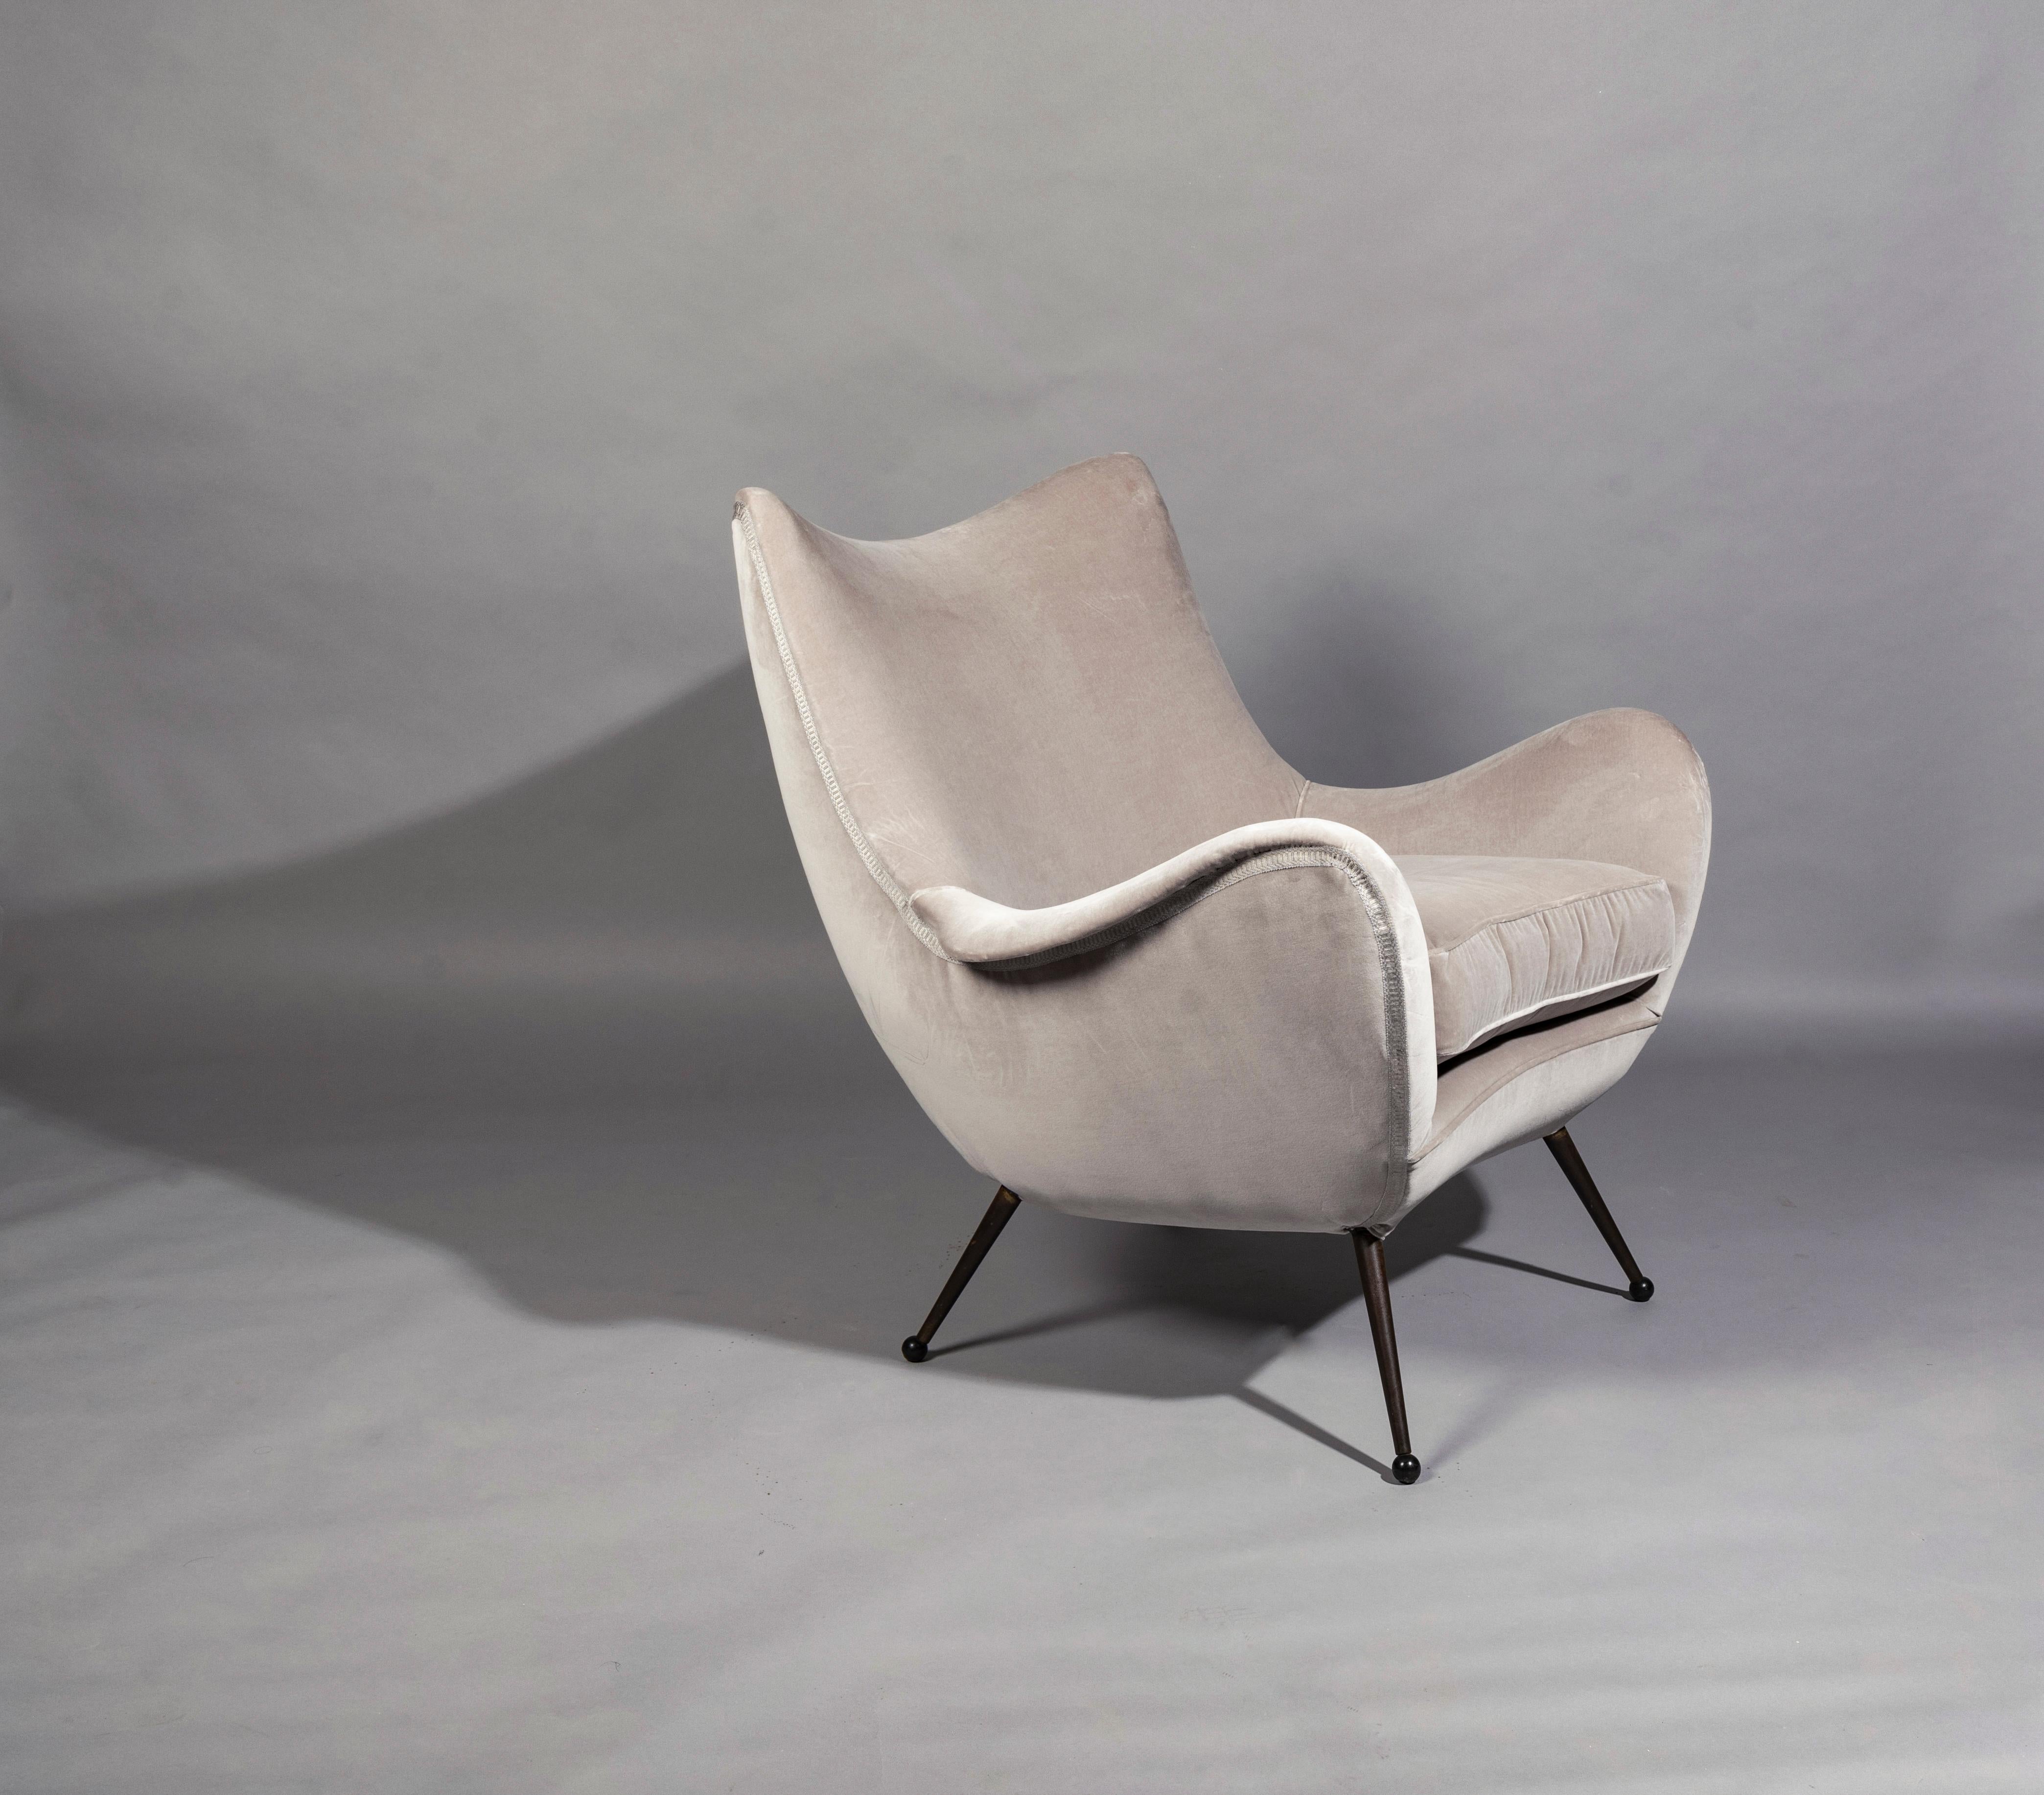 A very rare of sophisticated and dynamic shaped lounge chairs by Melchiorre Bega, brass feet reupholstered in Lelievre grey cotton velvet.